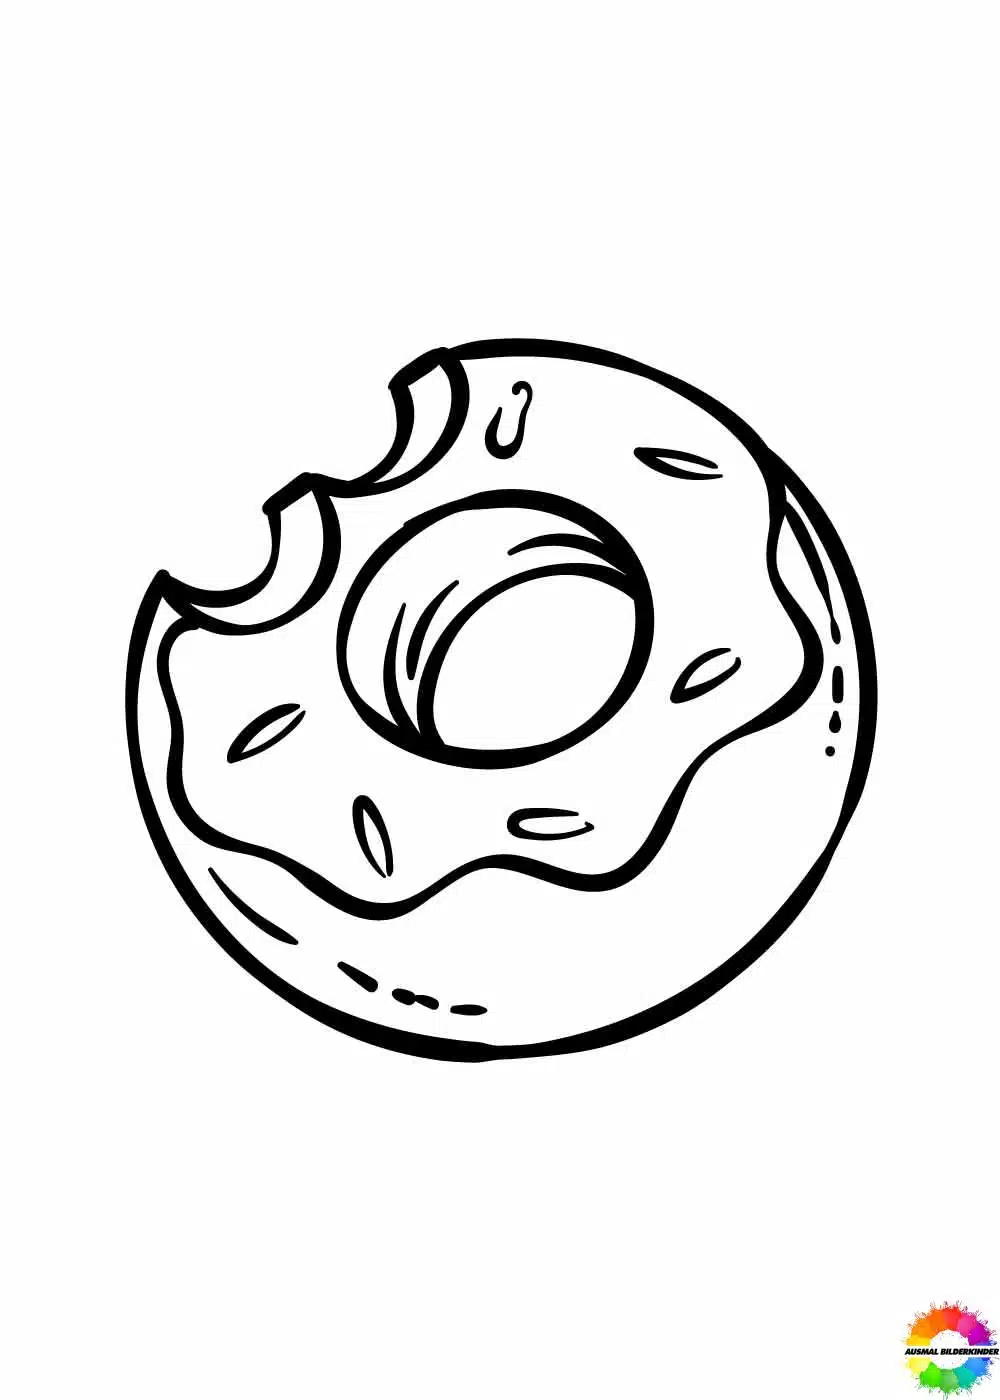 Donuts 17